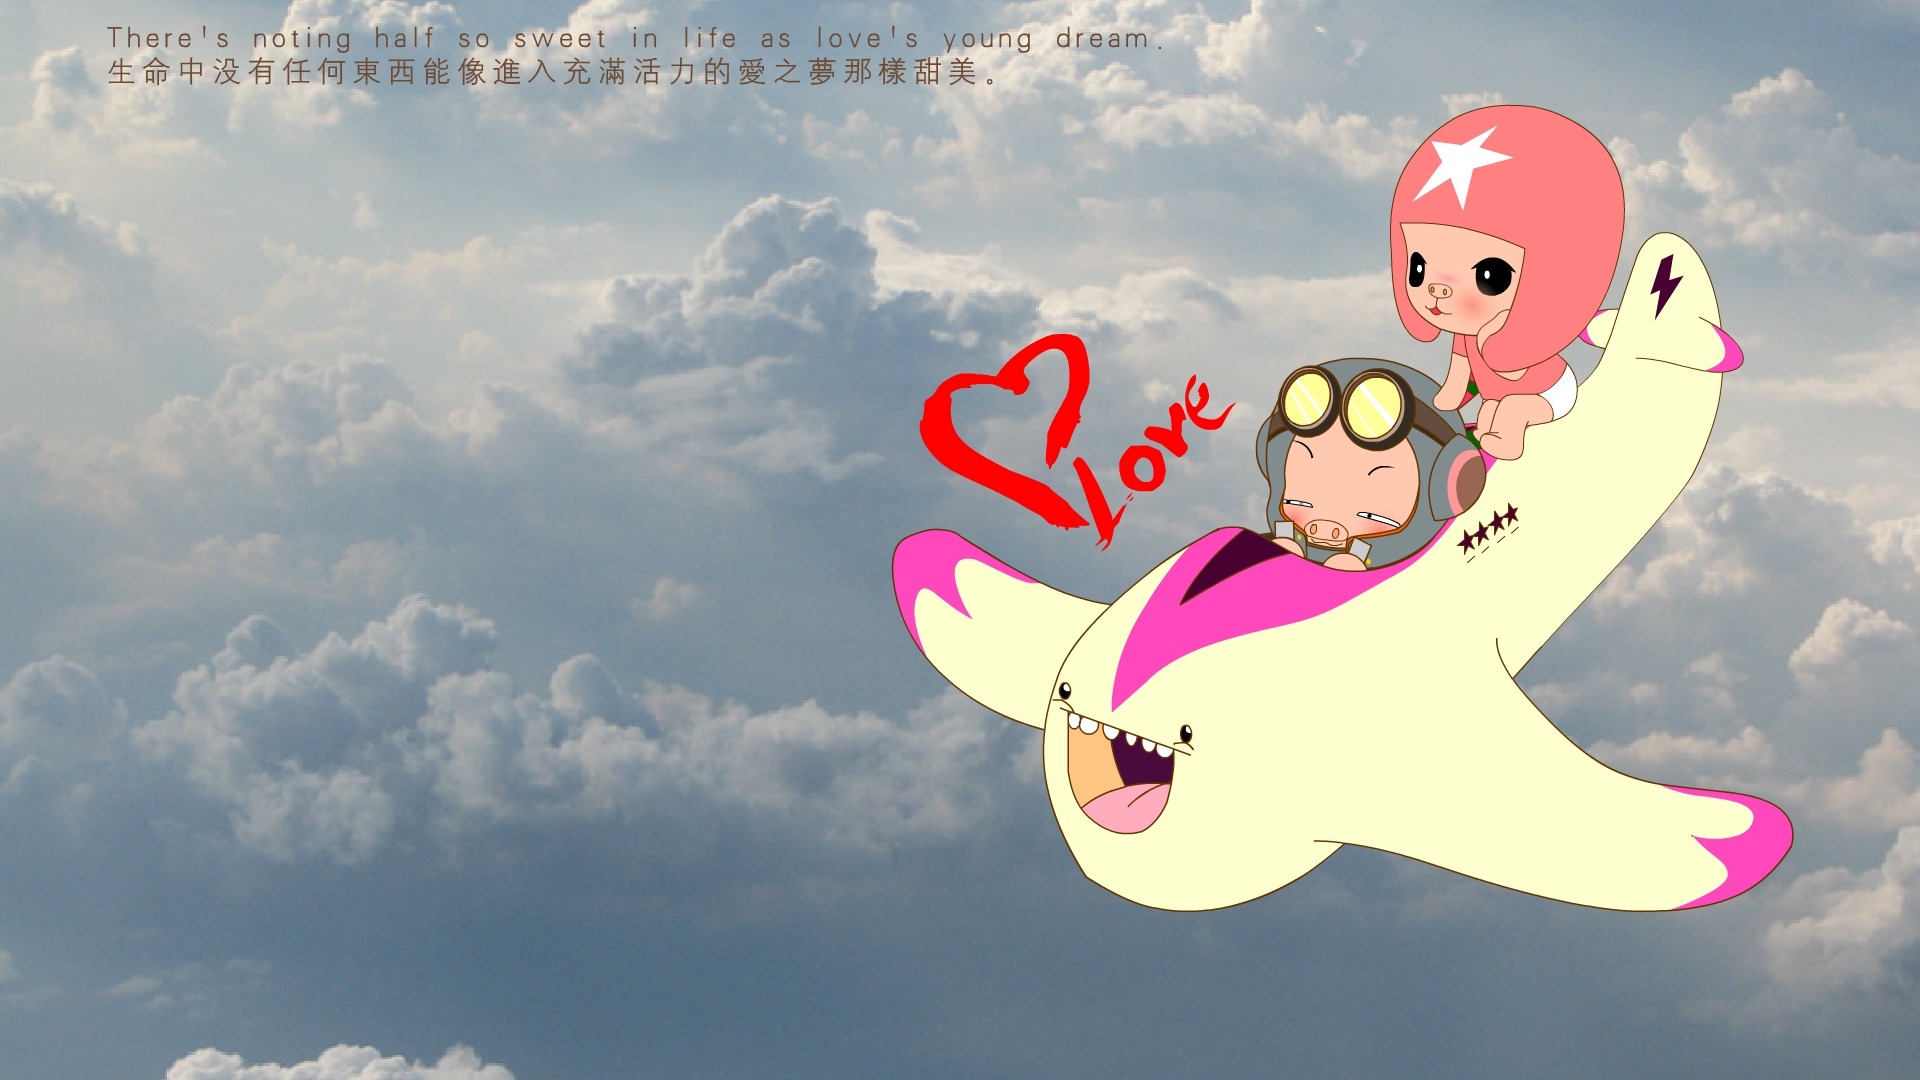 Love & Wallpaper Picasso Flying Pig #12 - 1920x1080